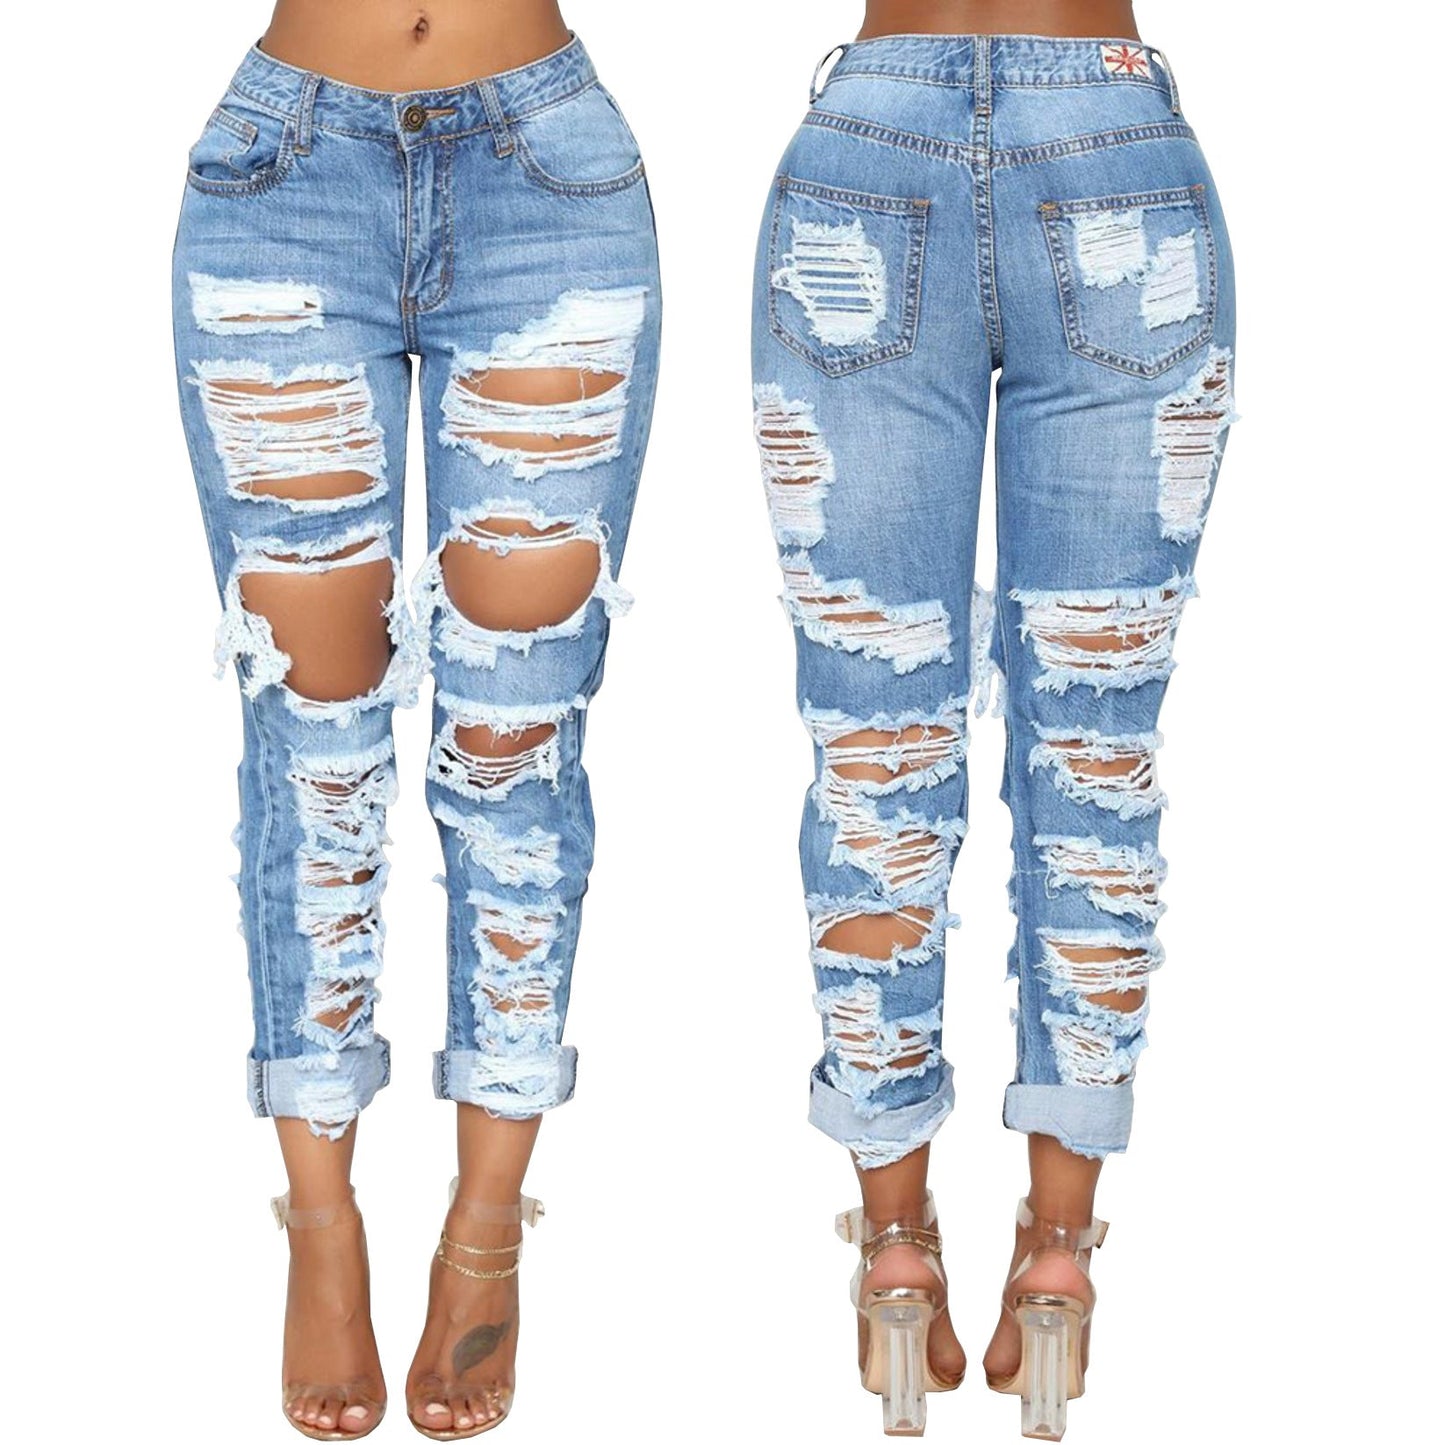 Personalized pierced beggar elastic jeans before and after fashion